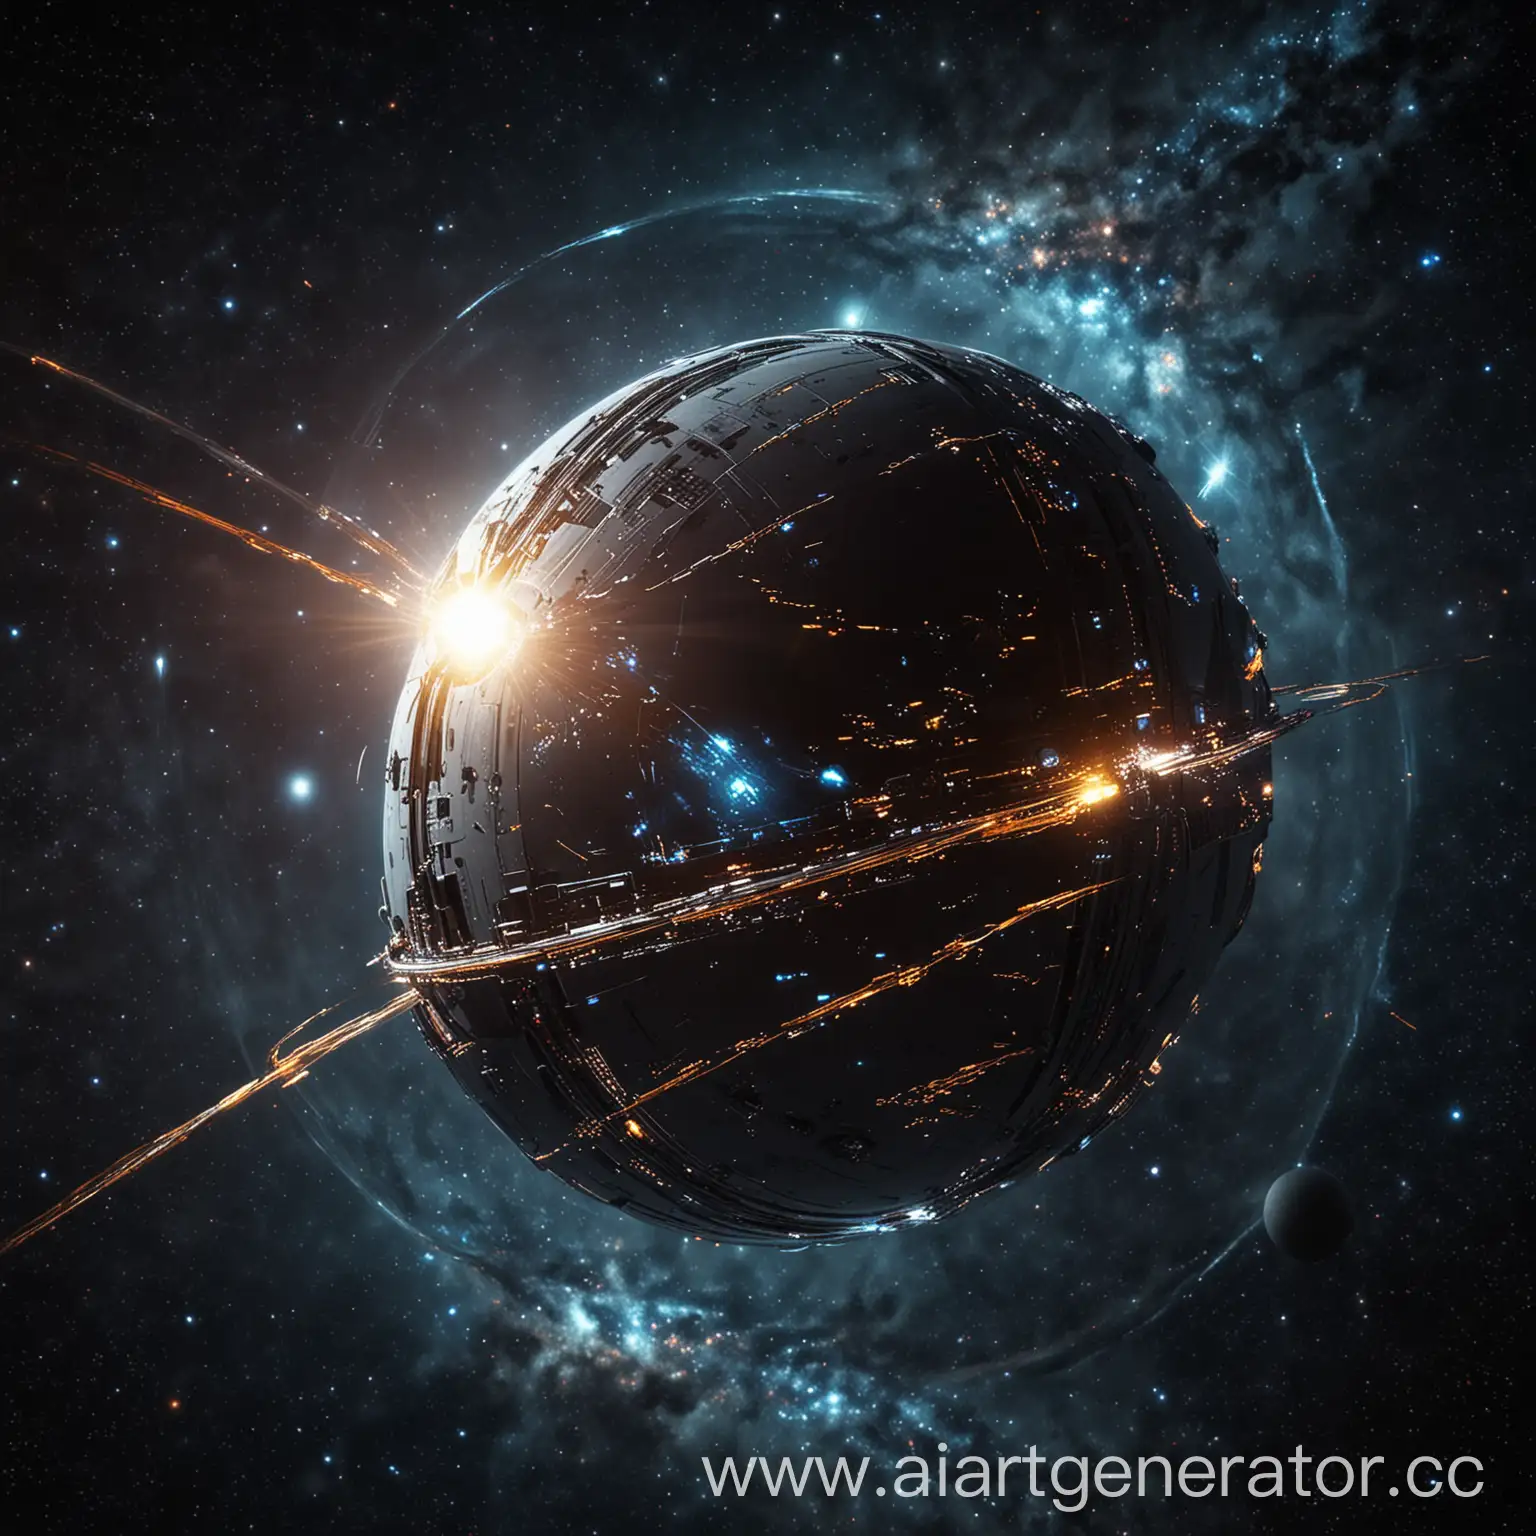 Futuristic-Metallic-Sphere-Floating-in-Space-Surrounded-by-Stars-and-Galaxies